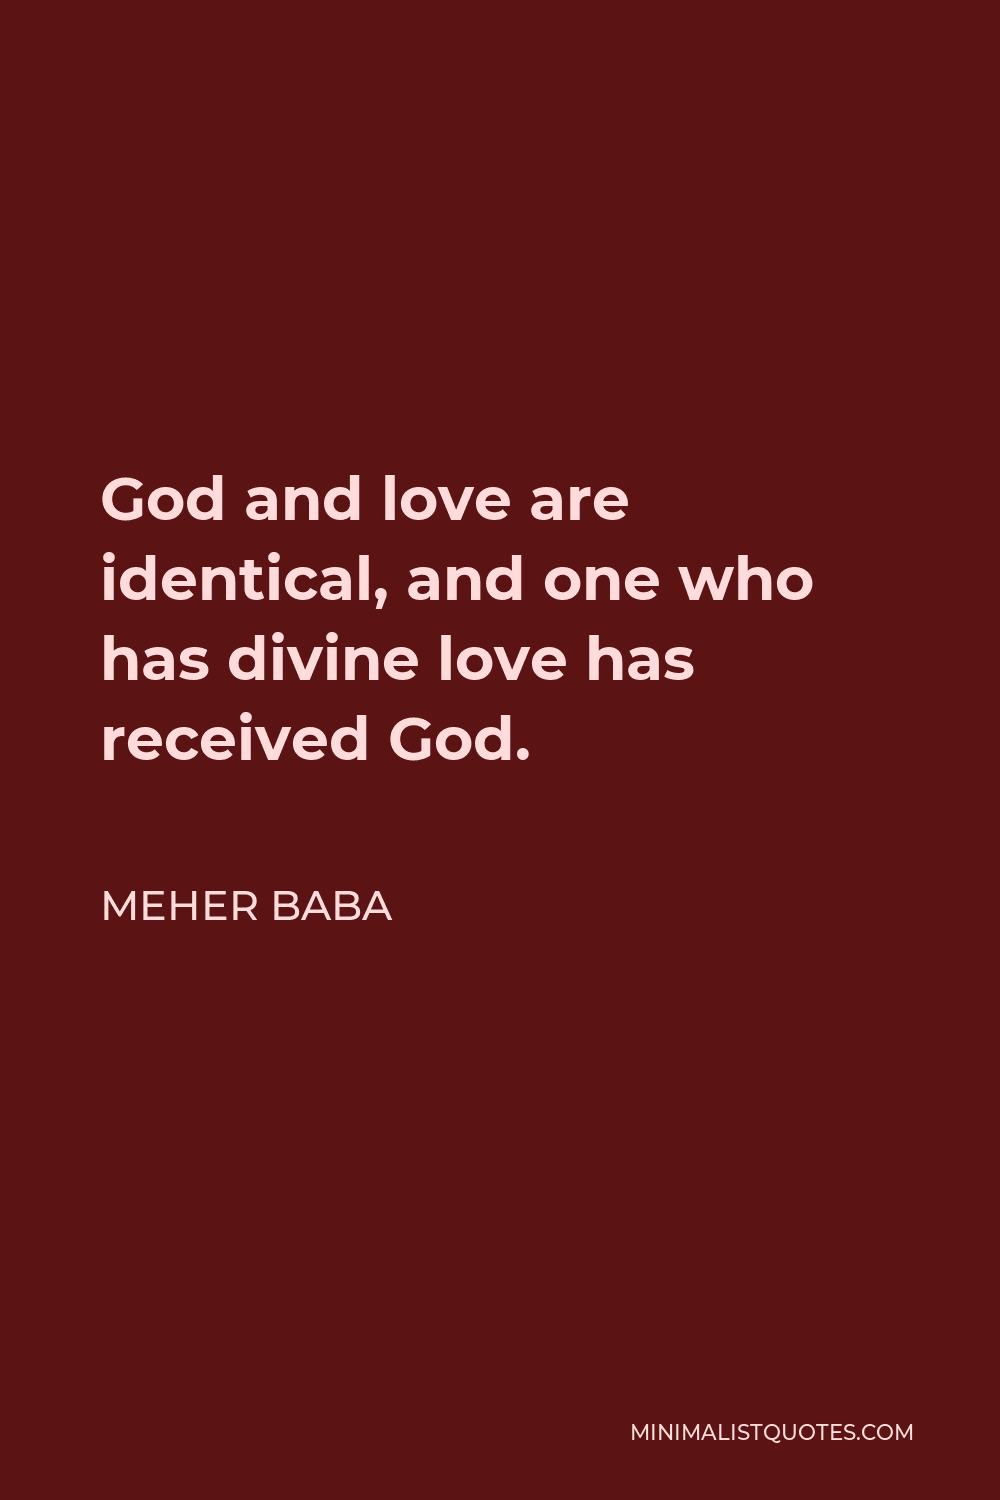 Meher Baba Quote - God and love are identical, and one who has divine love has received God.